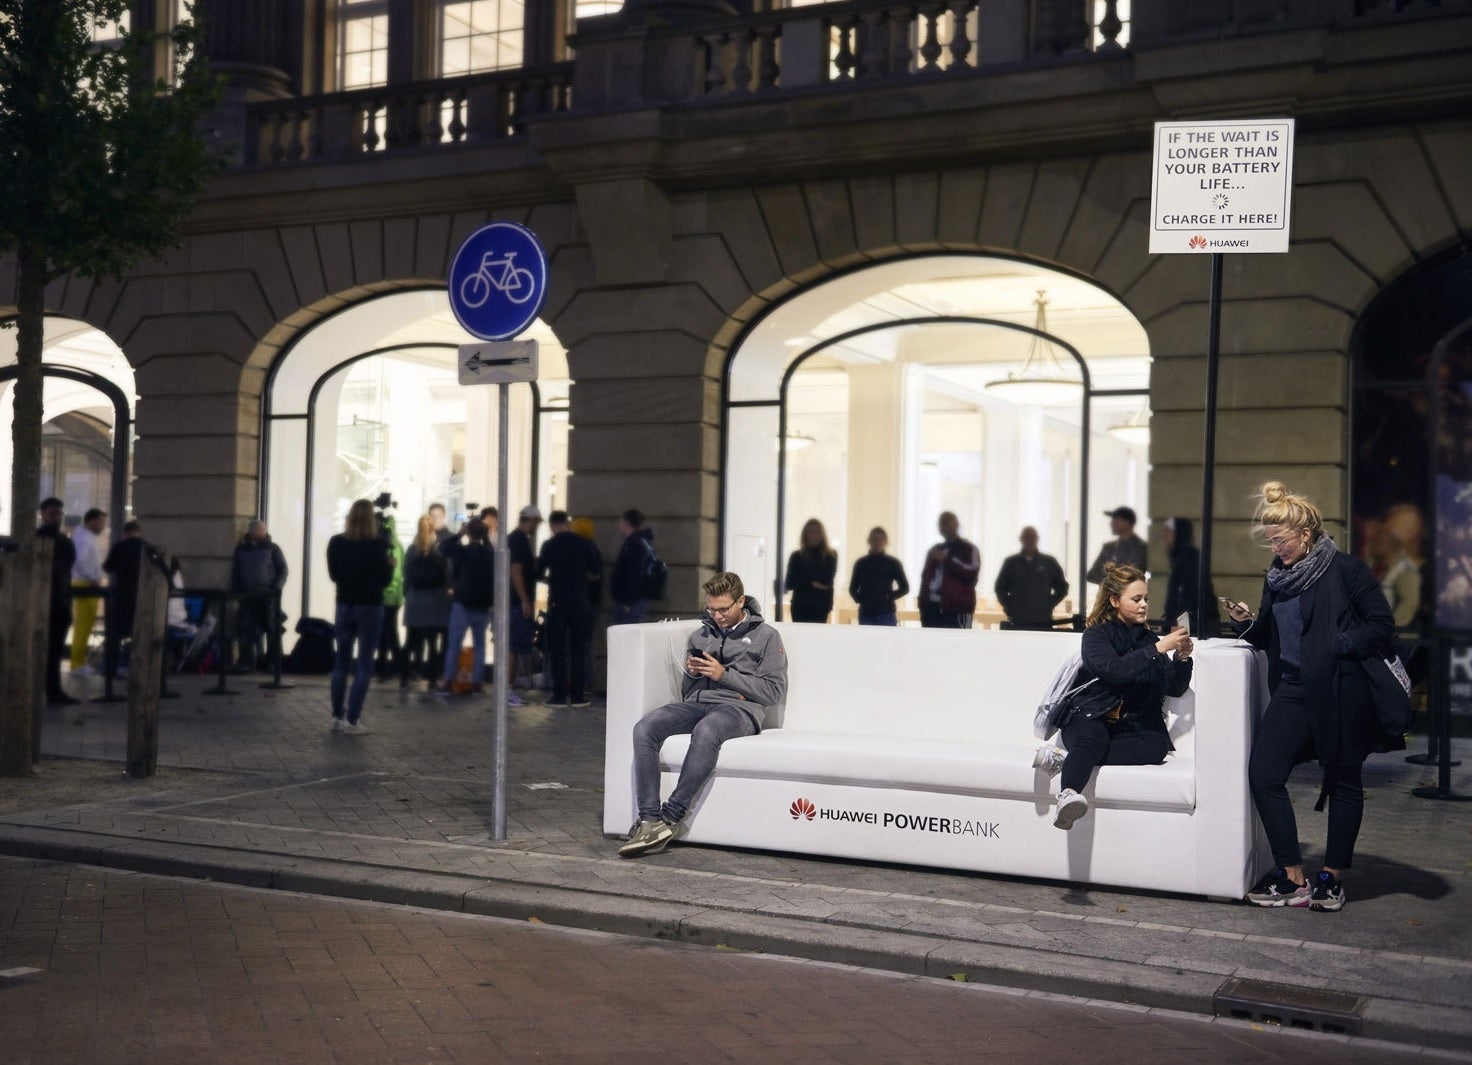 Update - Amsterdam as well, with an elegant couch in front of the Apple Store - Huawei trolls Apple Store queues for the iPhone XS with free power banks